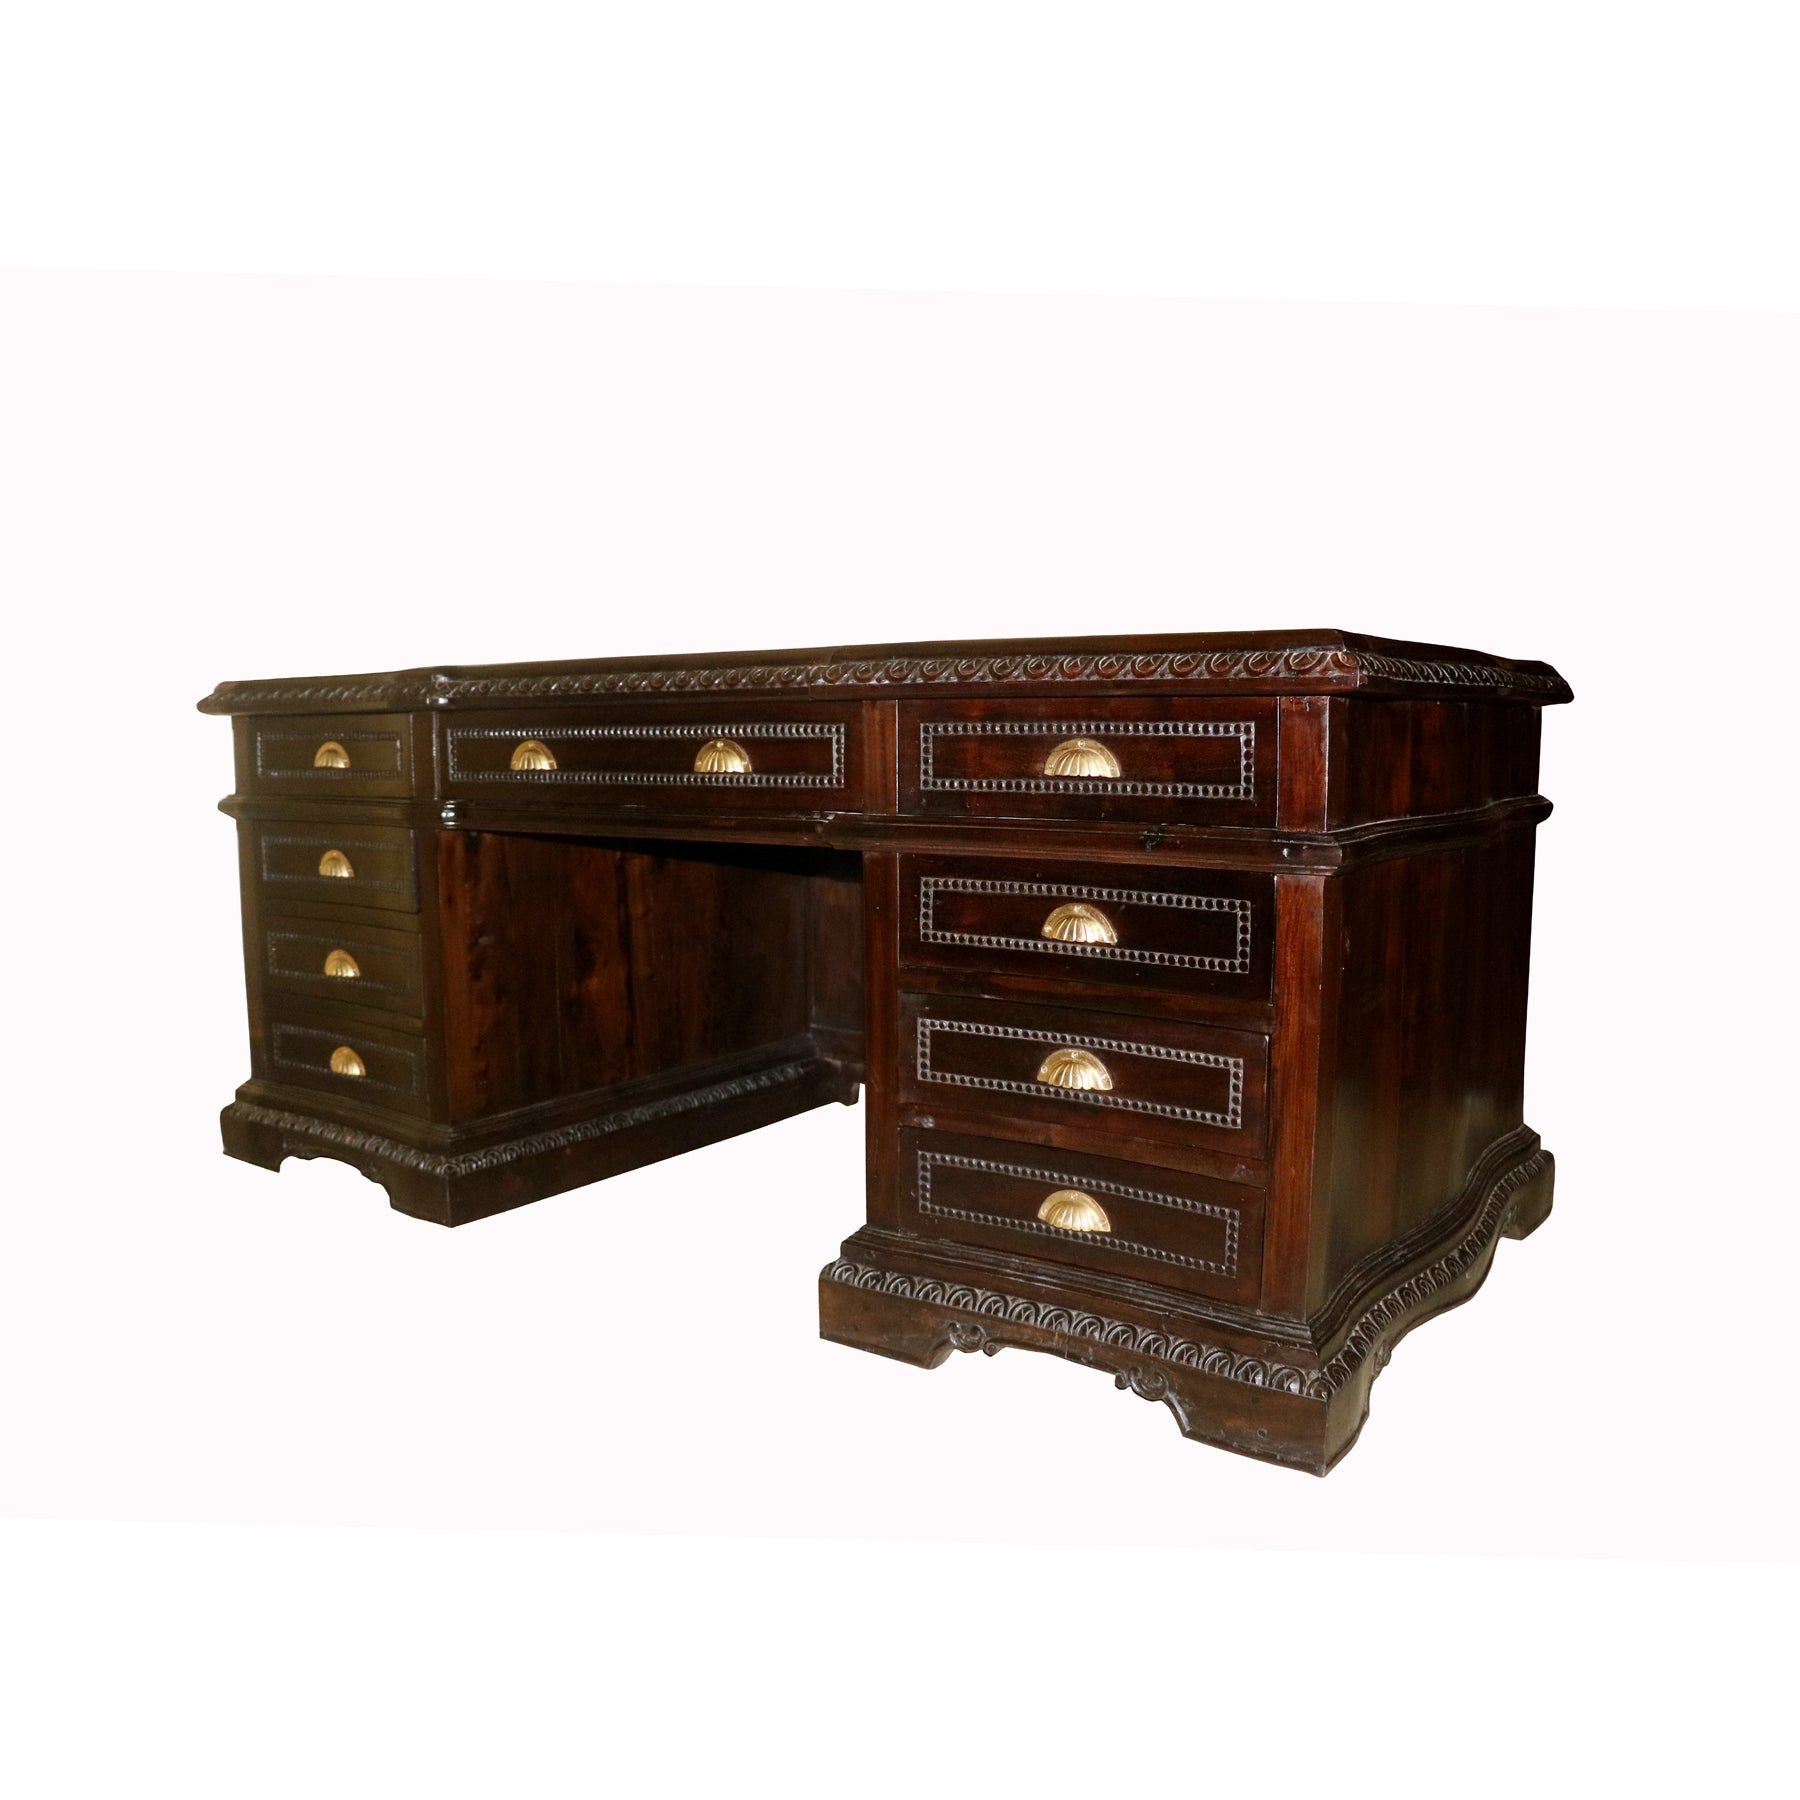 Classic Sturdy Wooden Royal Office Desk Study Table